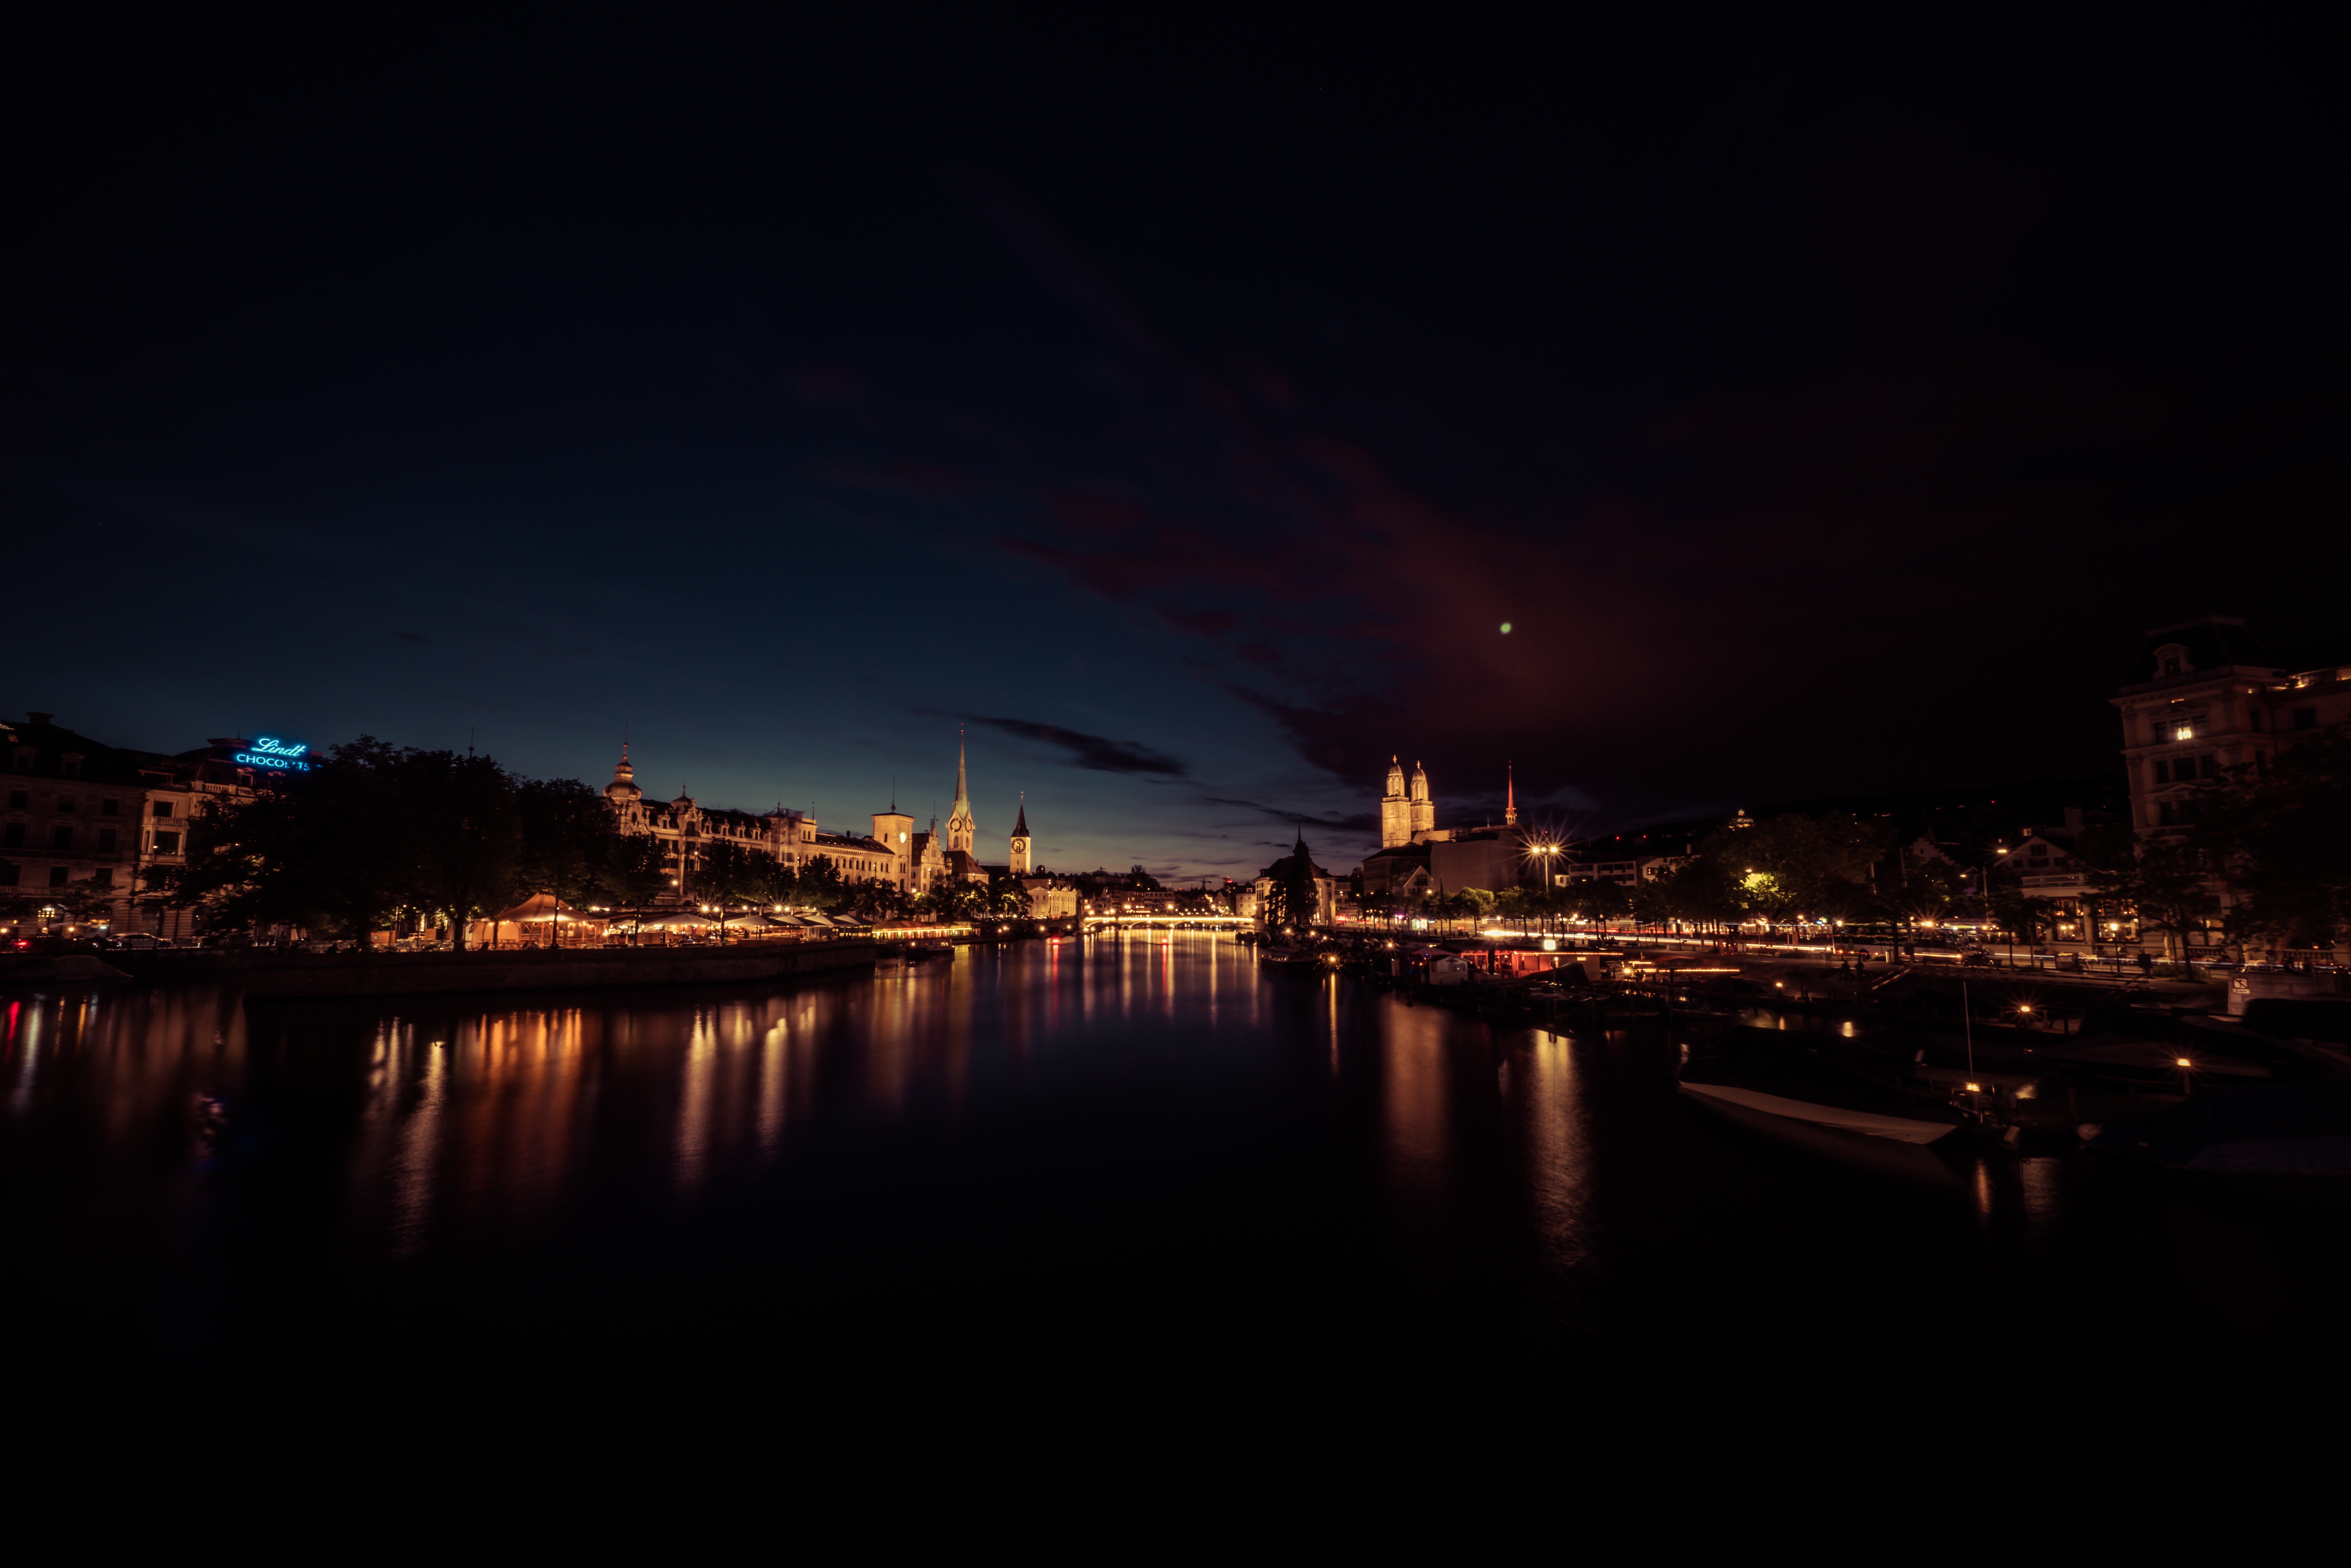 57012 download wallpaper city, dark, cities, rivers, night, lights, reflection screensavers and pictures for free